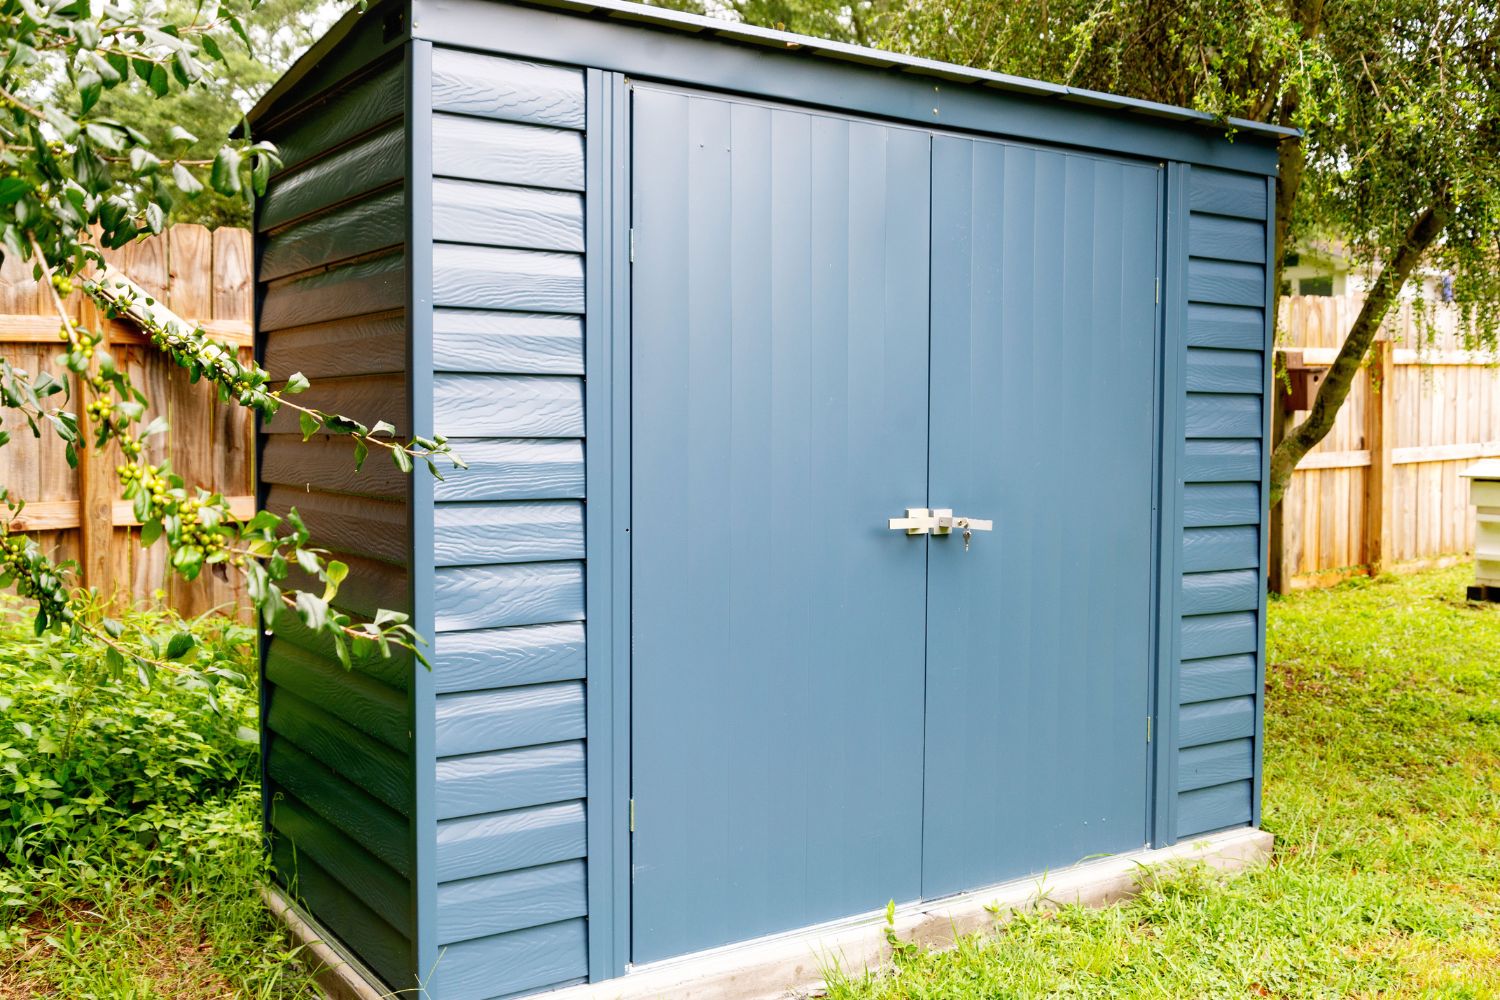 A angled view of the ShelterLogic storage shed in a backyard